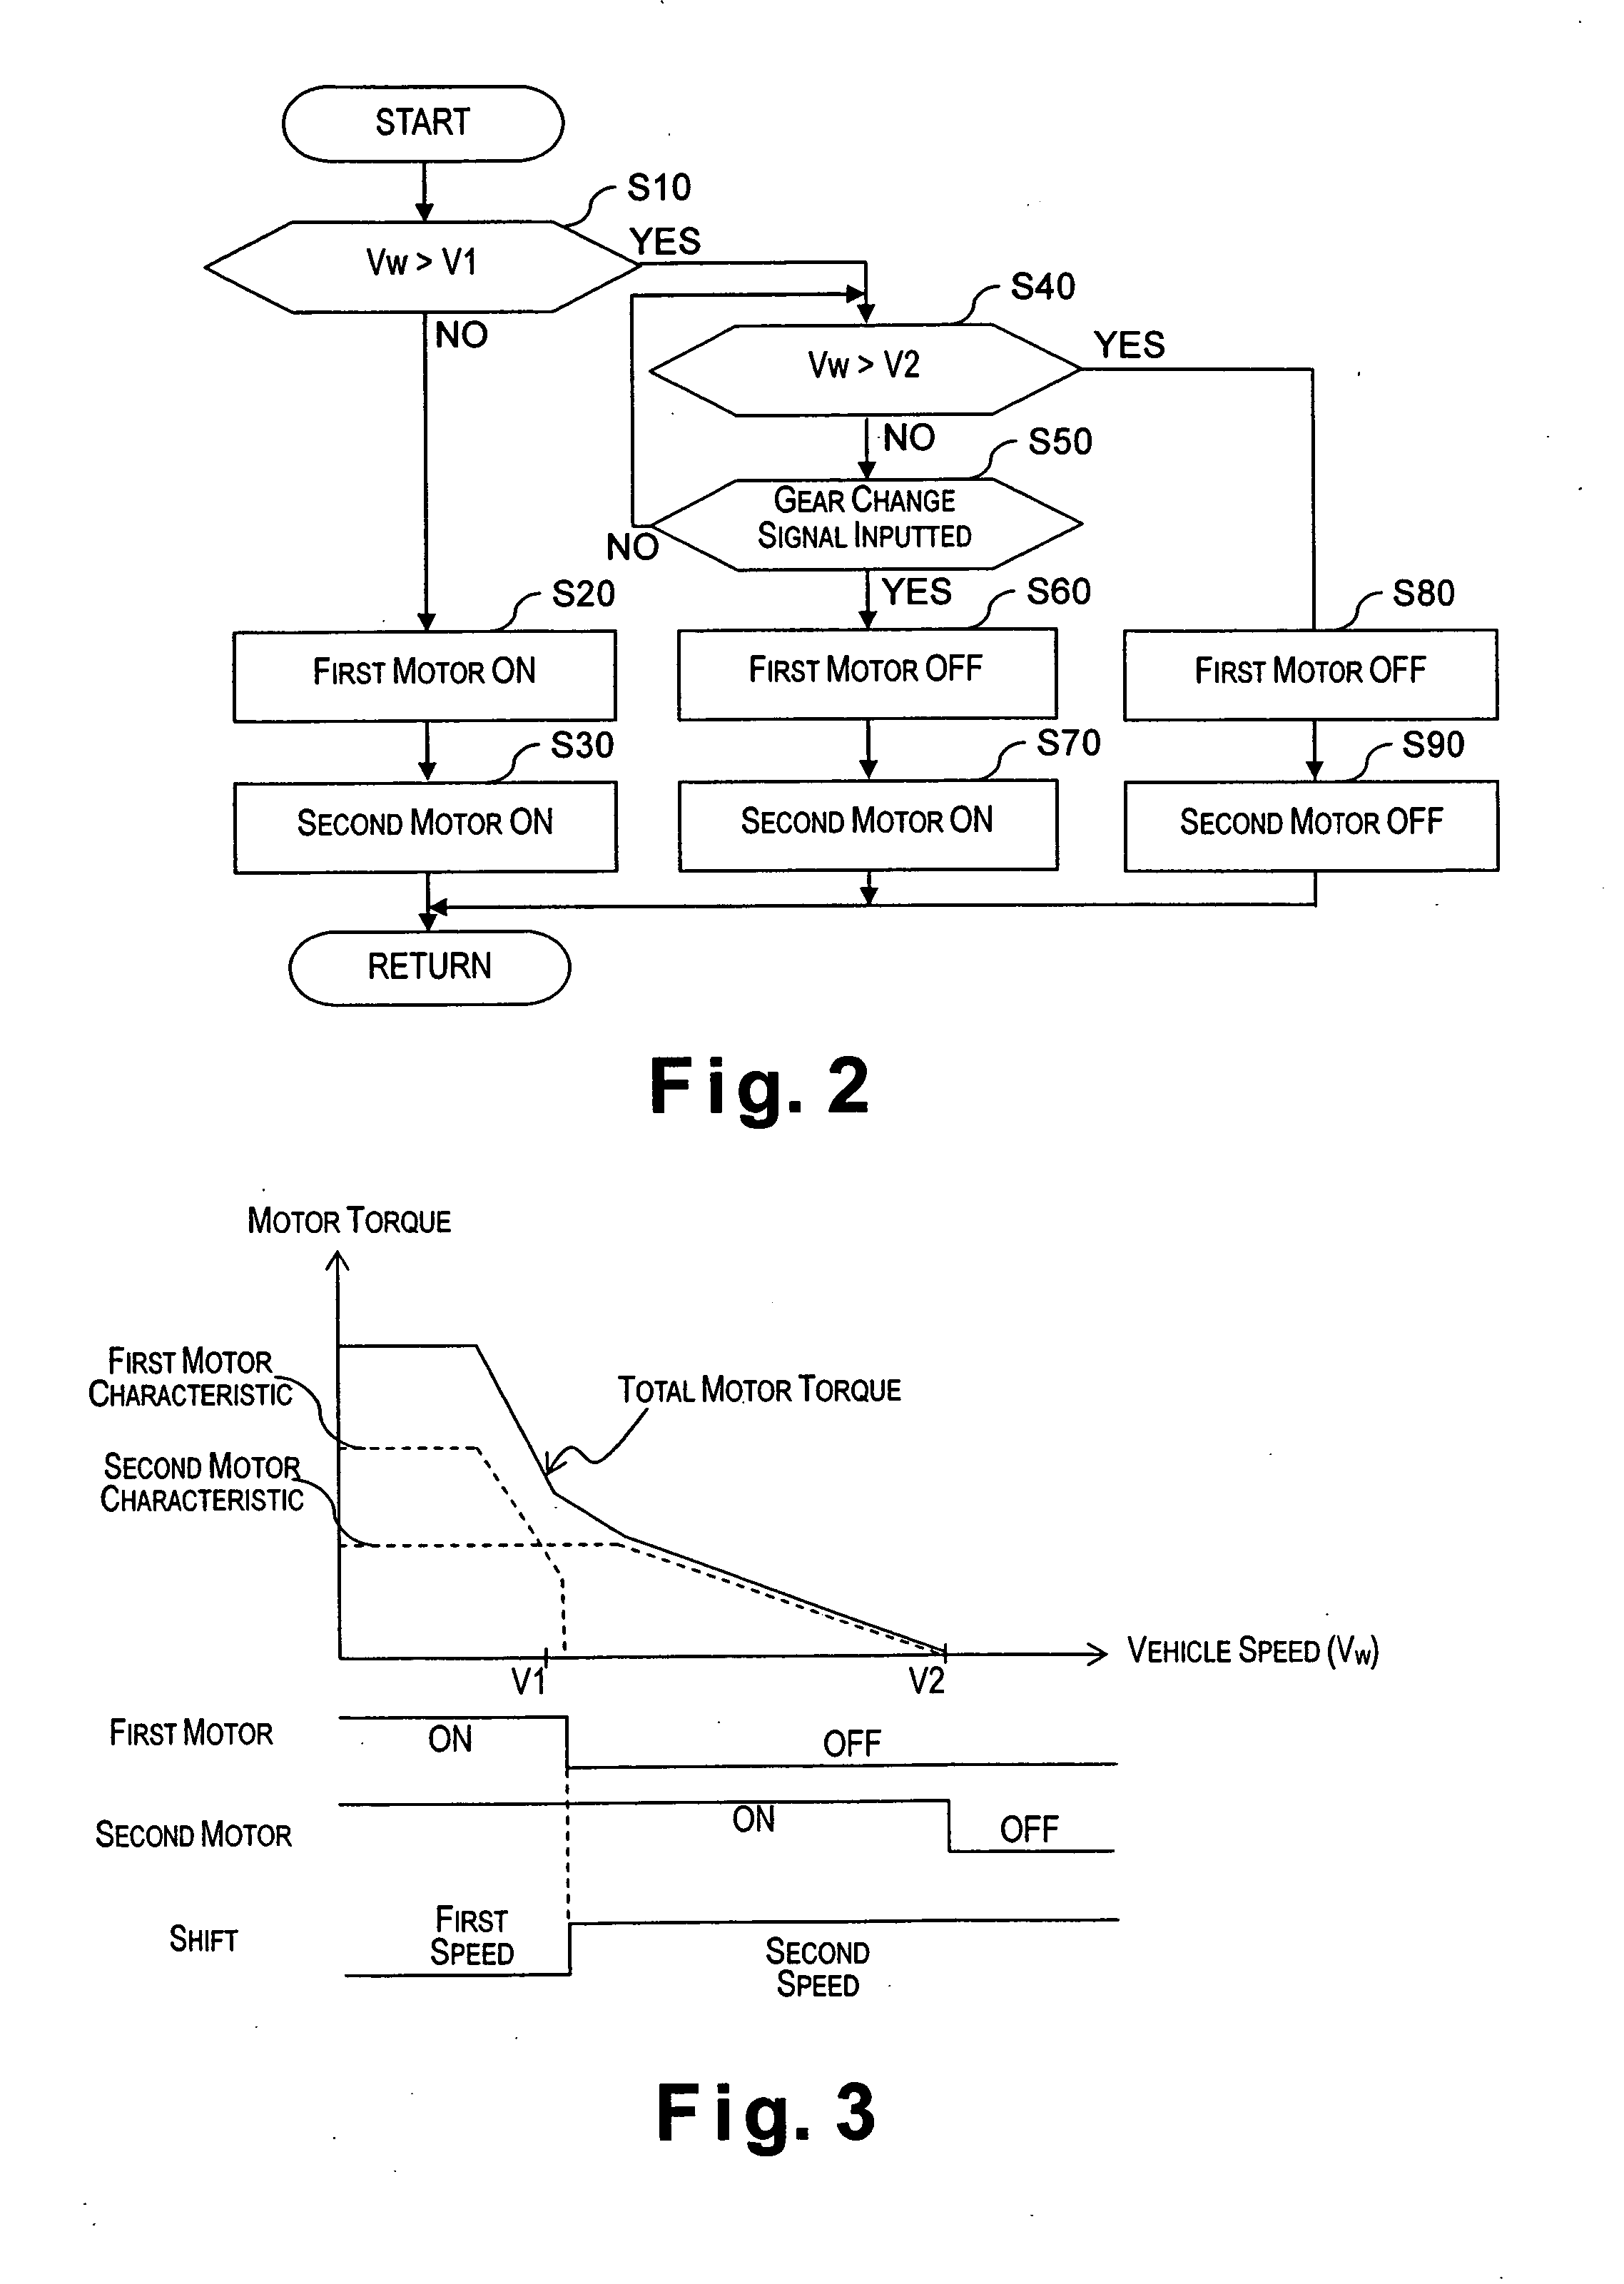 Vehicle drive system